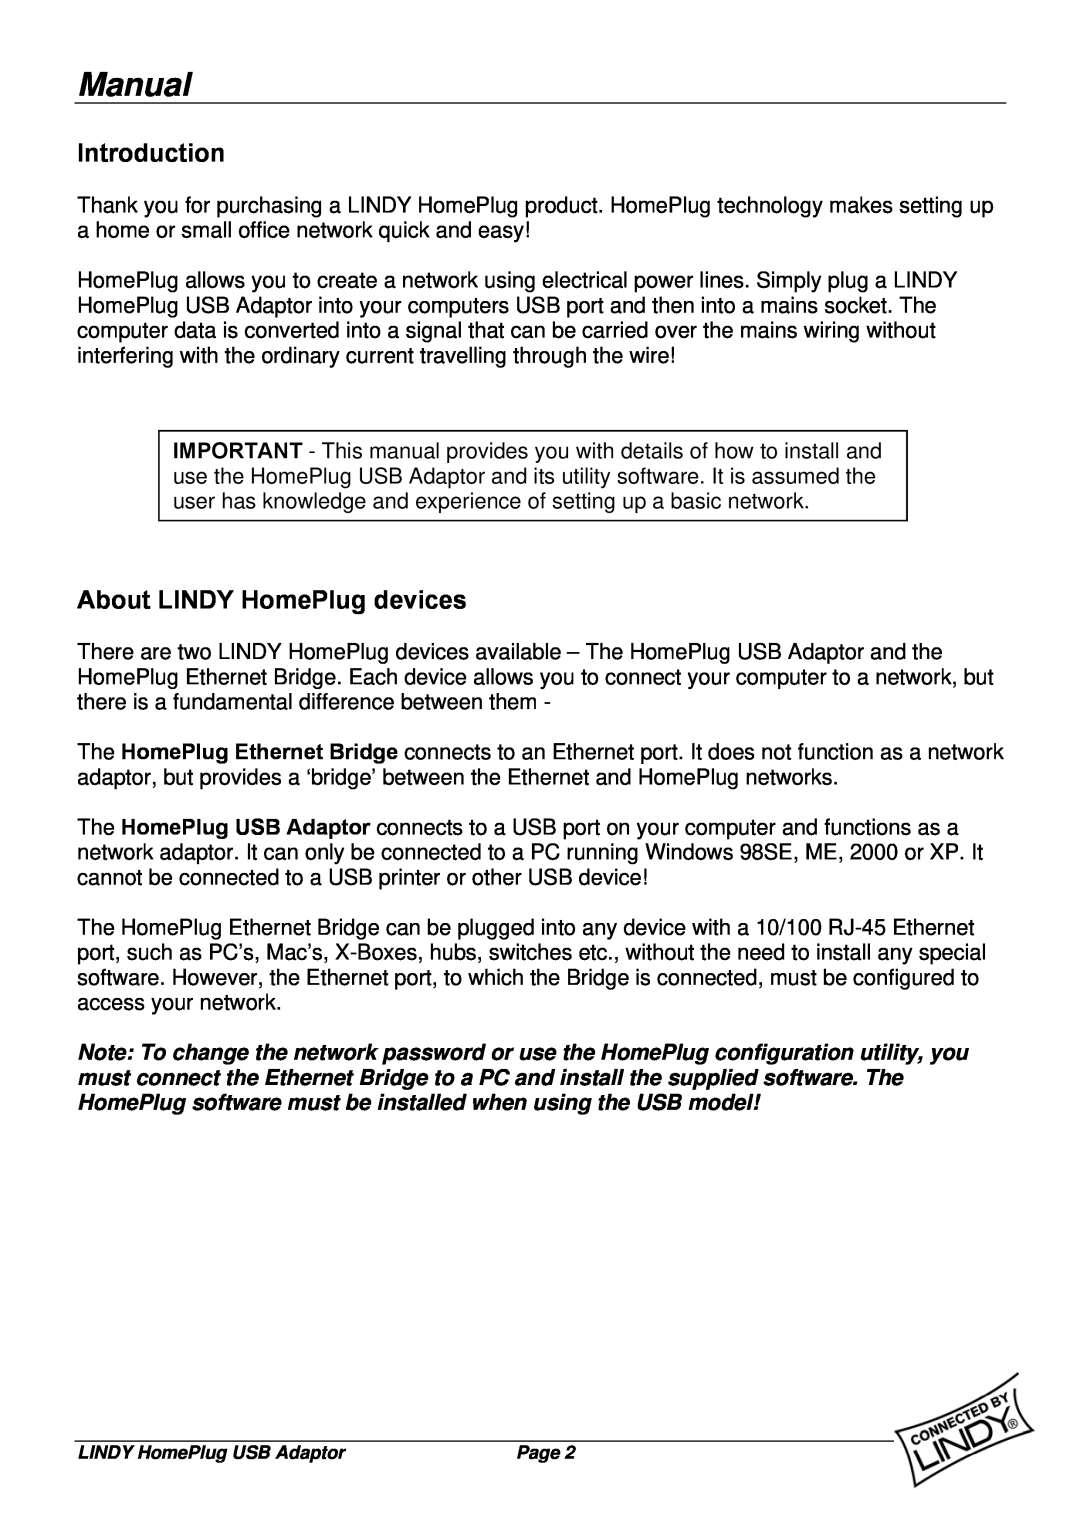 Lindy 25121 user manual Manual, Introduction, About LINDY HomePlug devices 